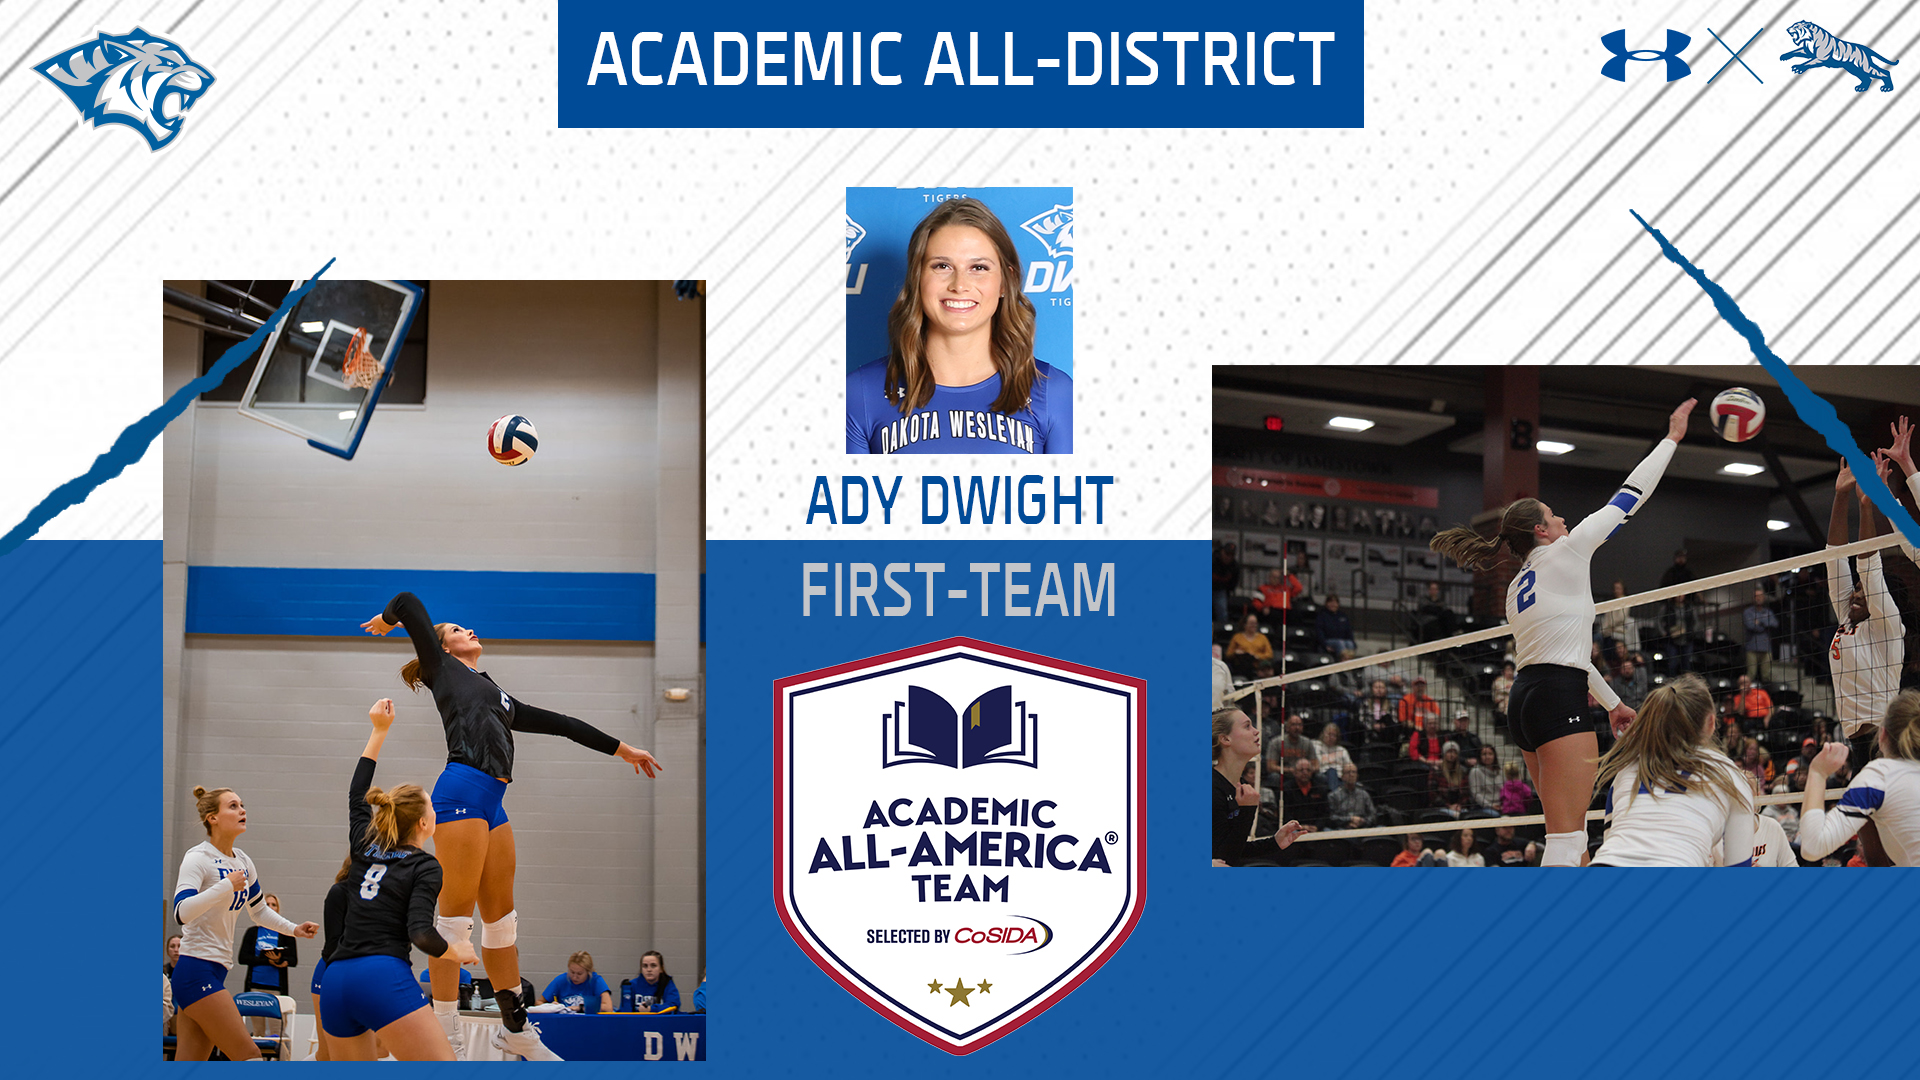 DWIGHT TABBED WITH FIRST-TEAM ACADEMIC ALL-DISTRICT HONORS